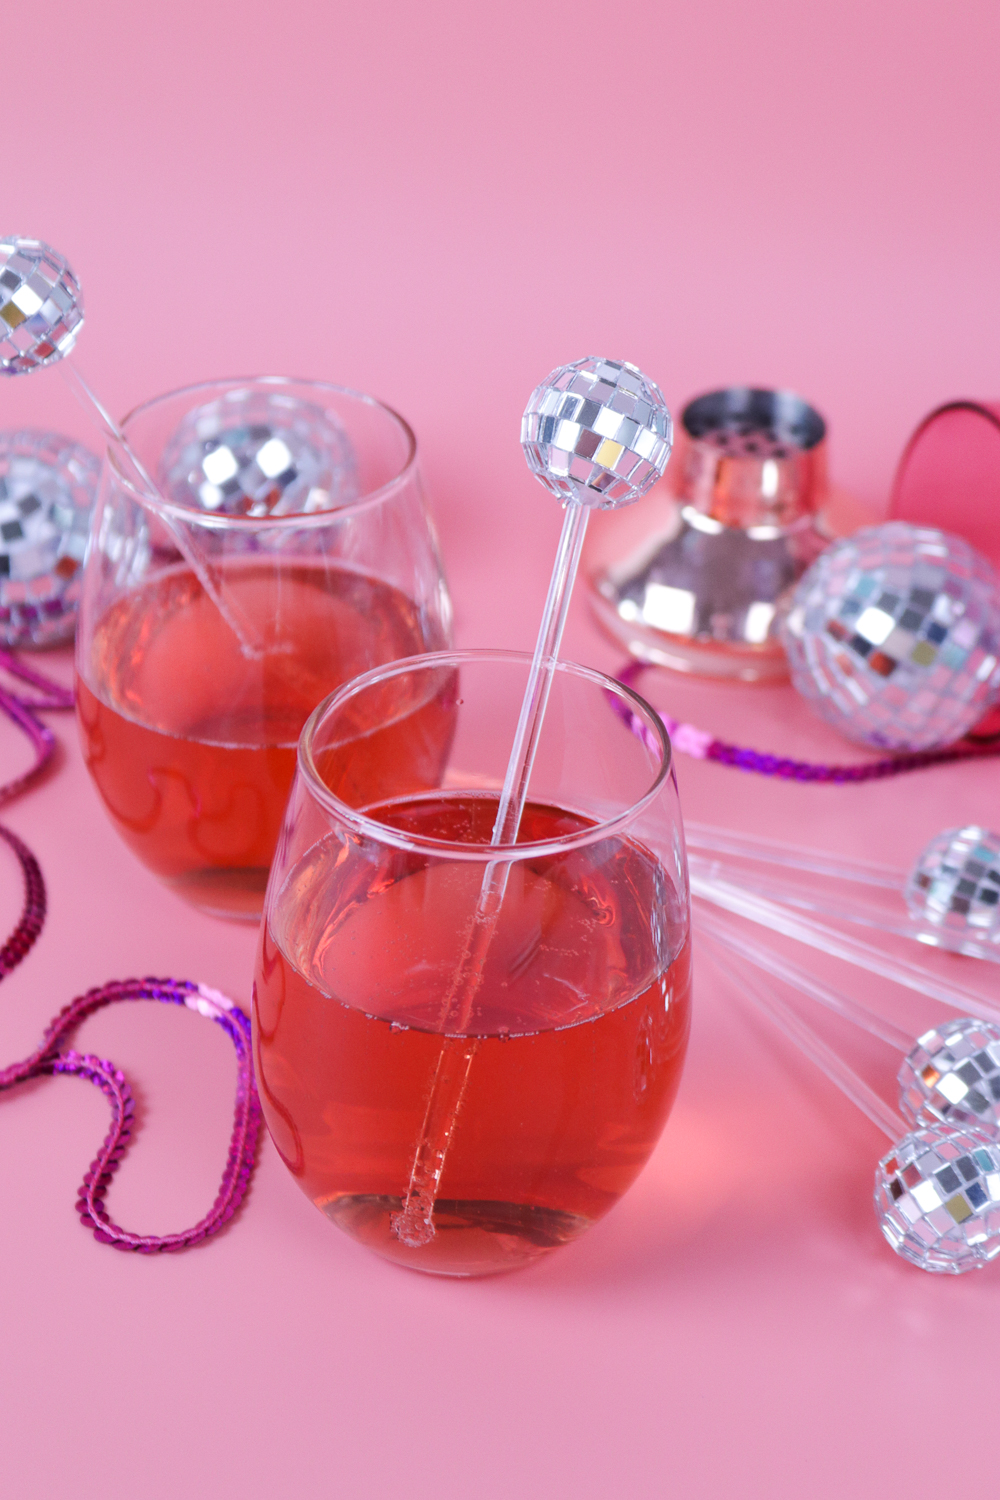 DIY disco ball drink stirrers for holiday parties